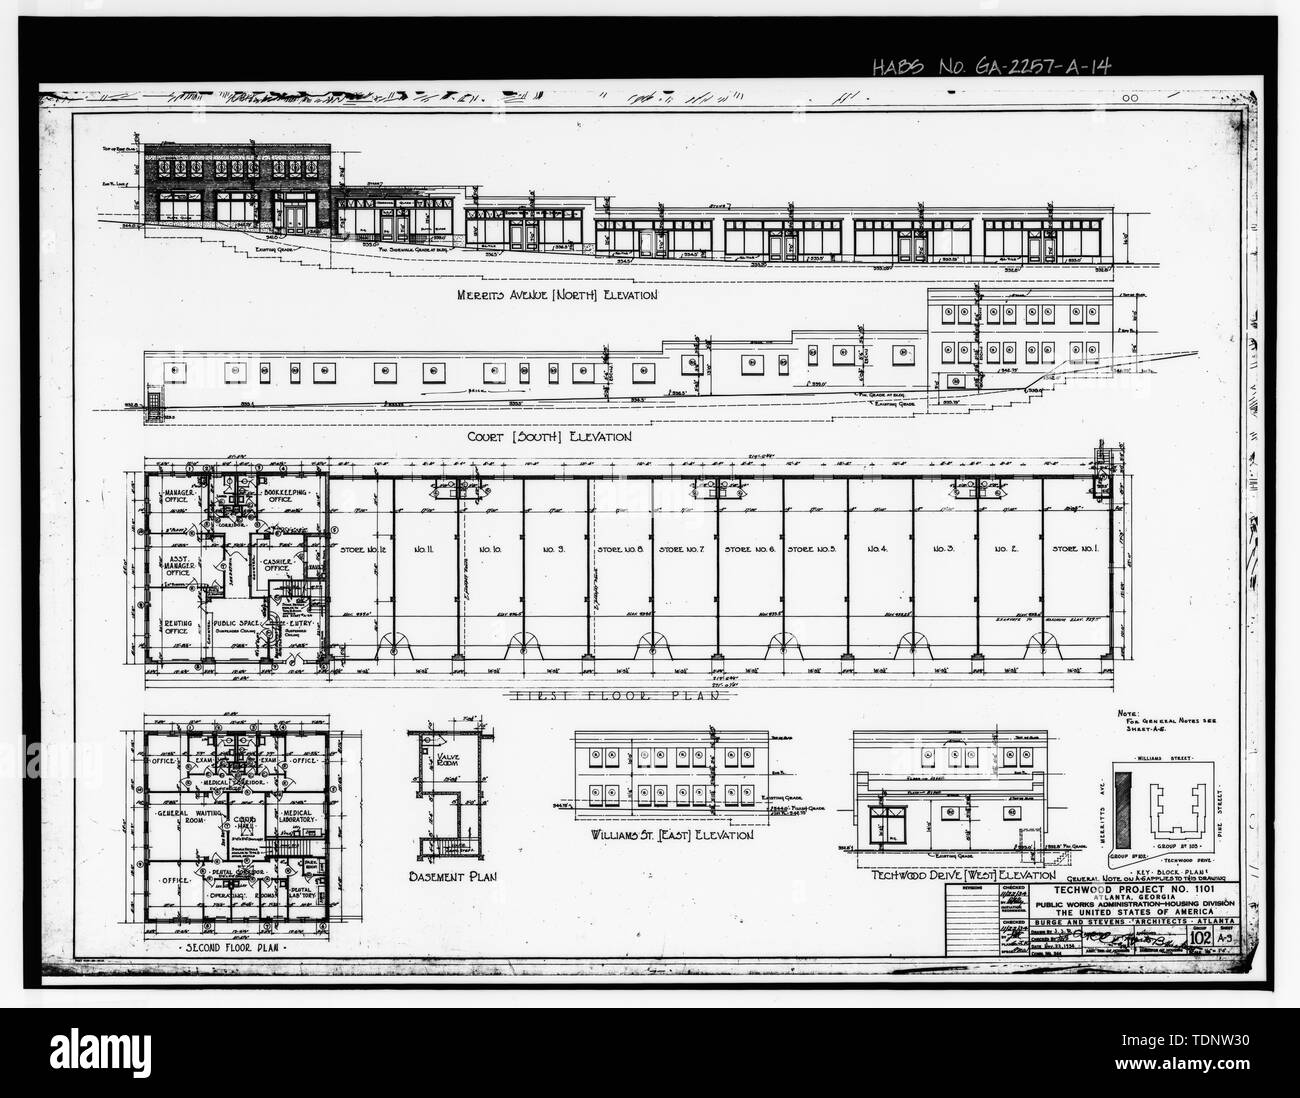 Photocopy of Drawing (November 1934 Architectural Drawings by Burge and Stevens, in Possession of the Engineering and Capital Improvements Department of the Atlanta Housing Authority, Atlanta, Georgia). FLOOR PLANS AND ELEVATIONS, ADMINISTRATION BUILDING AND STORE, TECHWOOD PROJECT -1101, SHEET A-9. - Techwood Homes, Store and Administration Building, 114-138 Merrit Avenue, Atlanta, Fulton County, GA Stock Photo